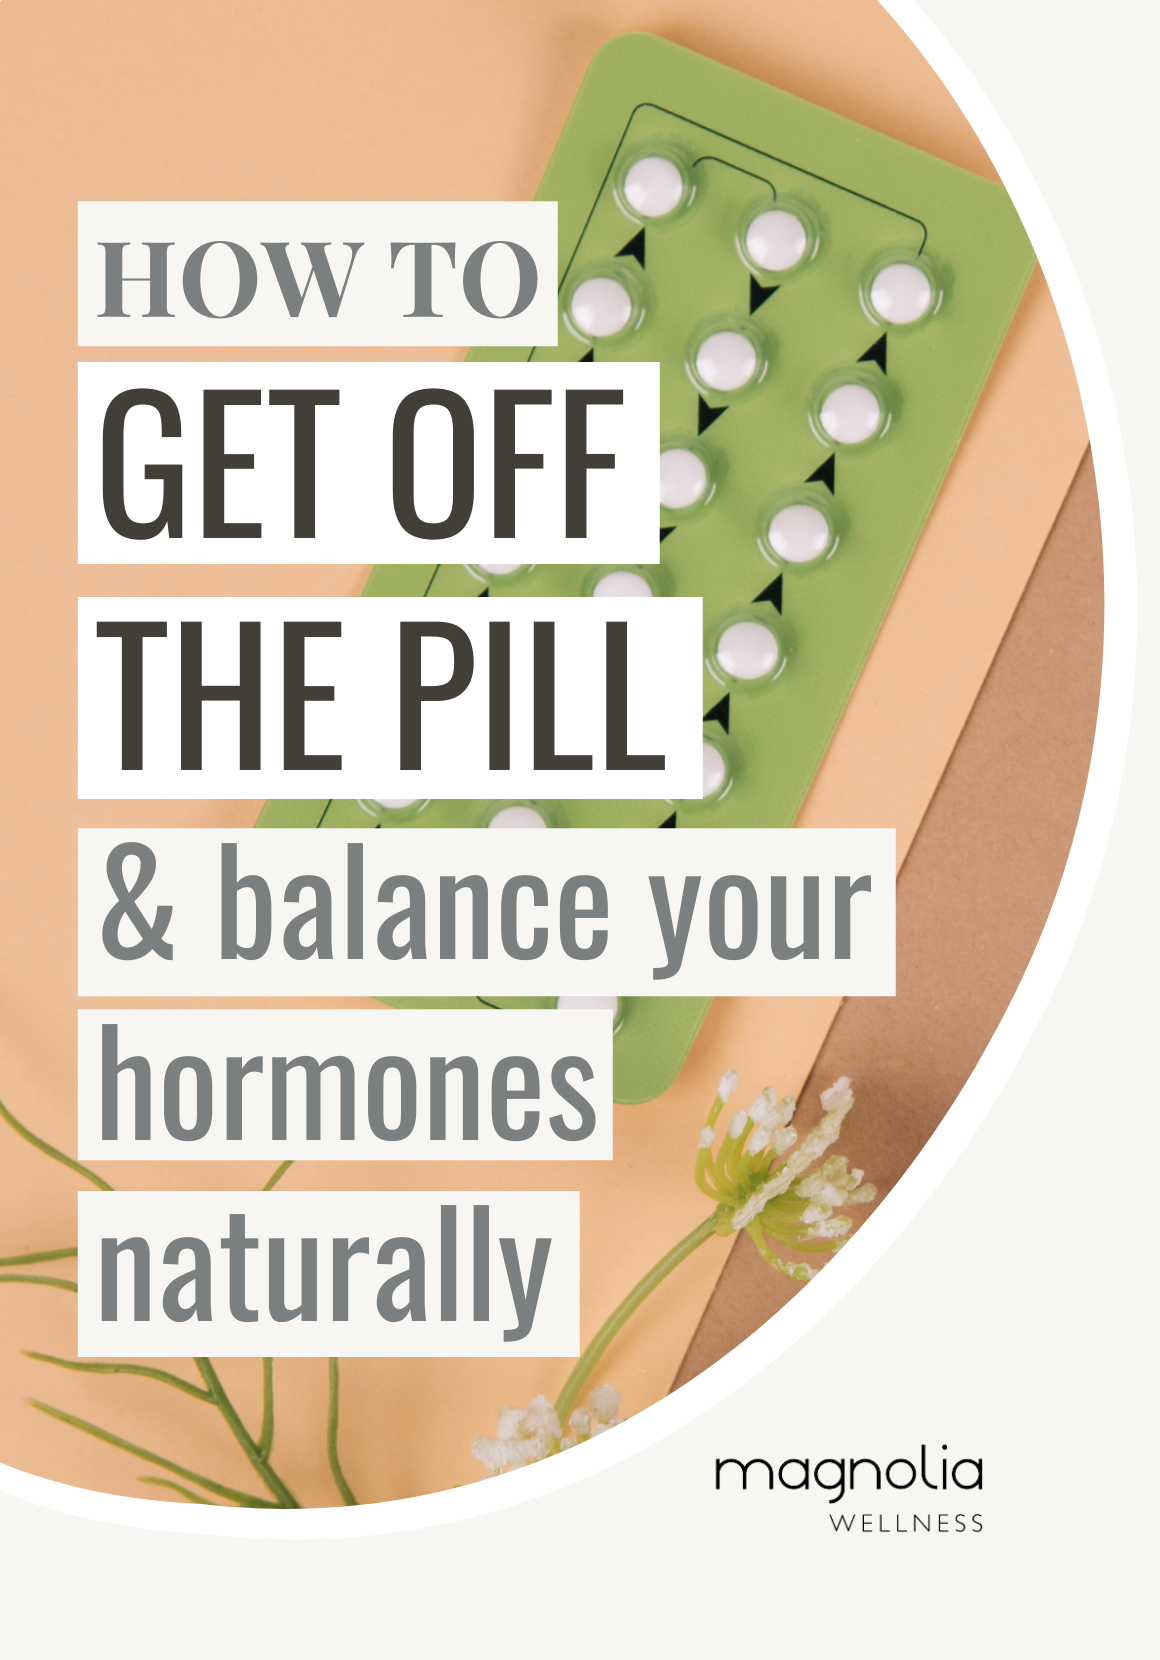 Balancing Hormones, Part 1: Getting Off the Pill